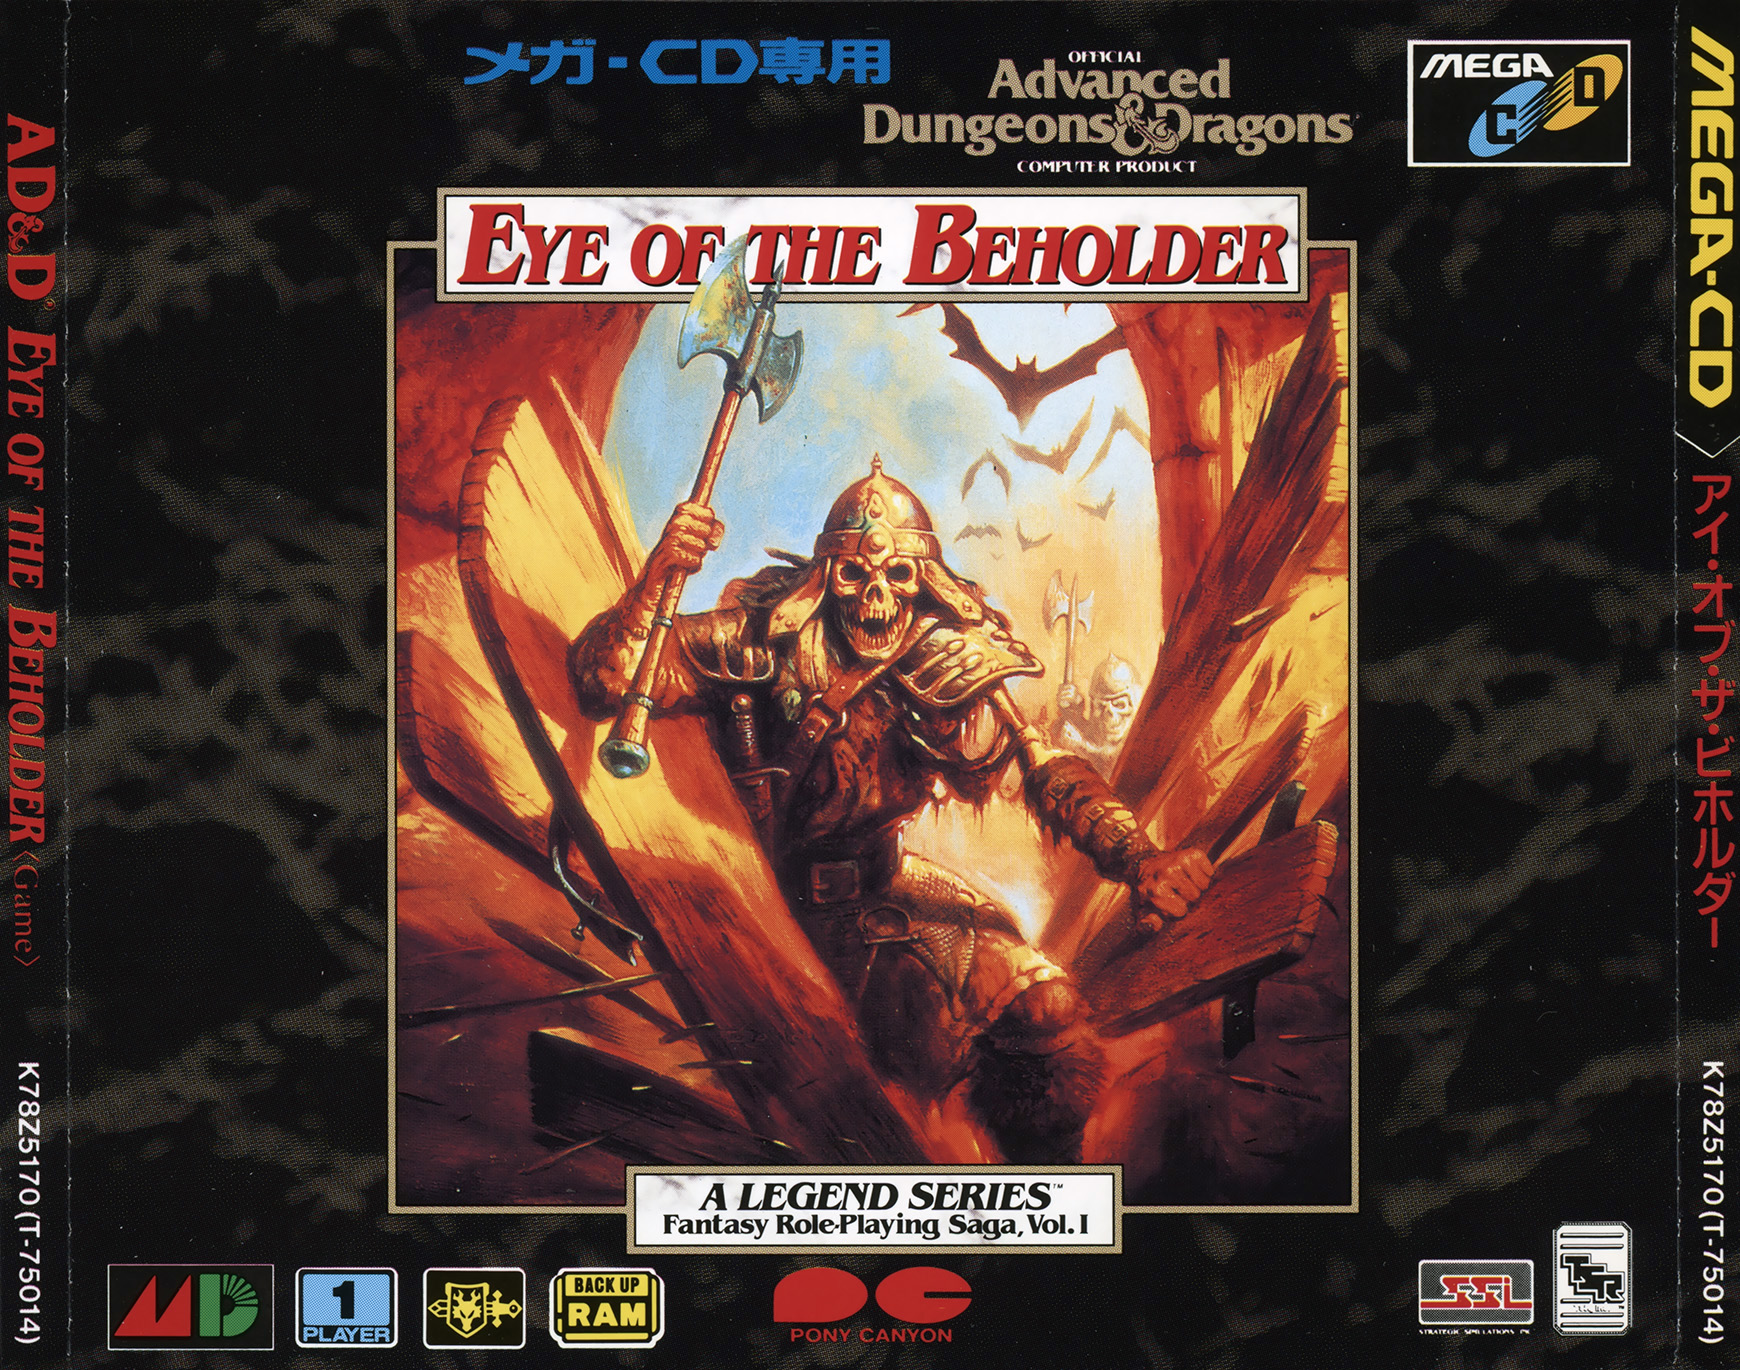 eye of the beholder 2 copy protection